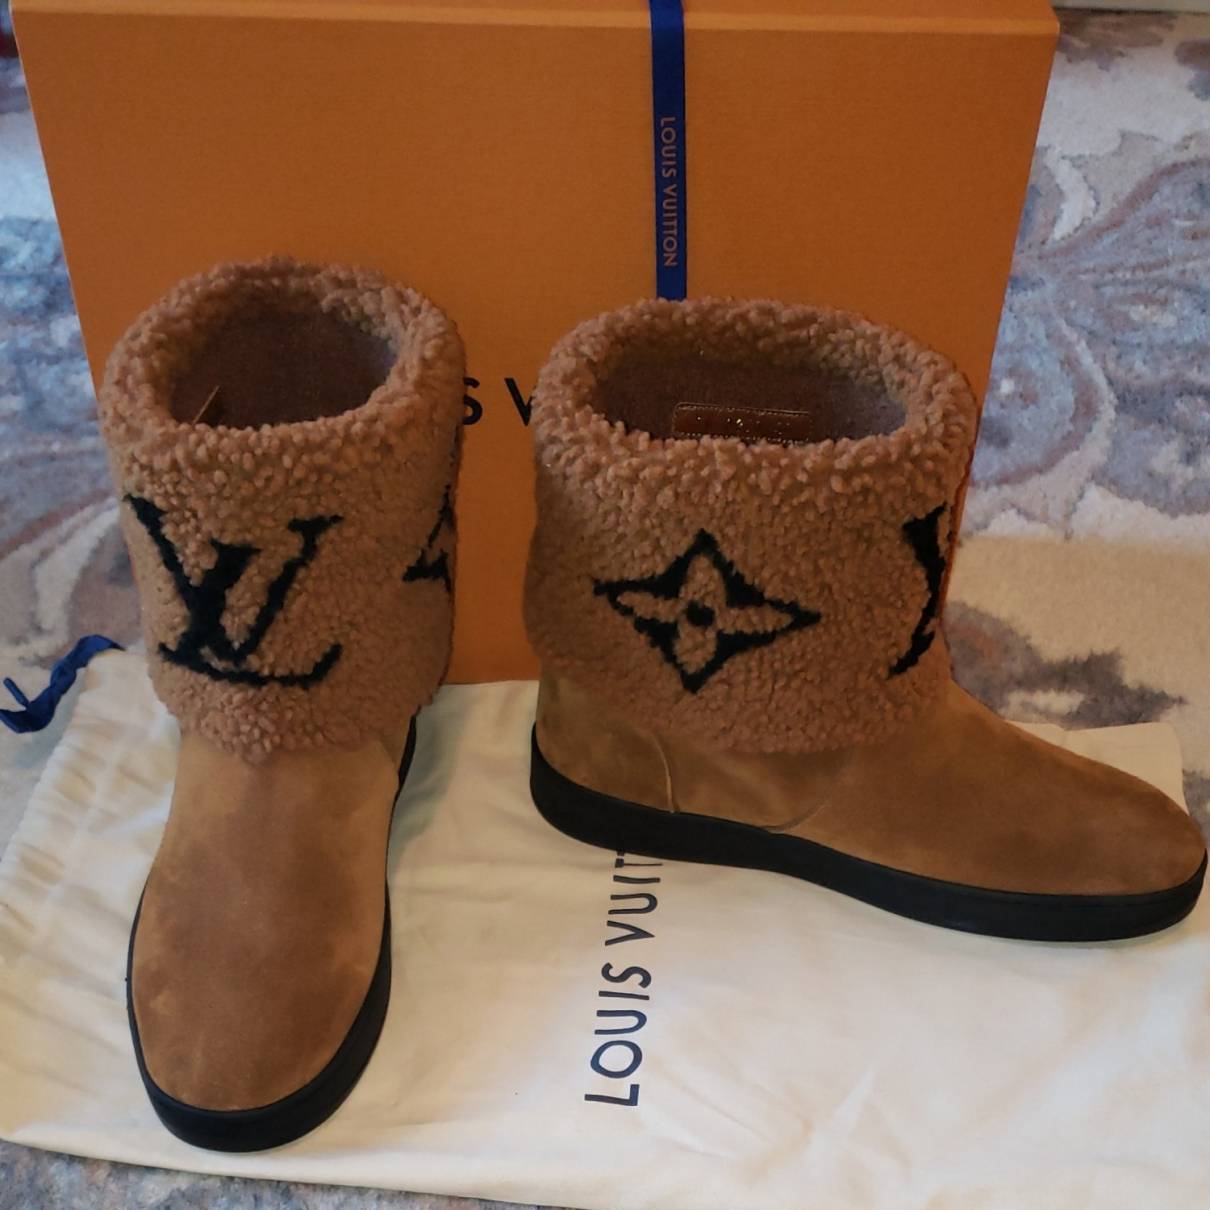 Louis Vuitton Women's Snowdrop Flat Ankle Boots Suede and Shearling